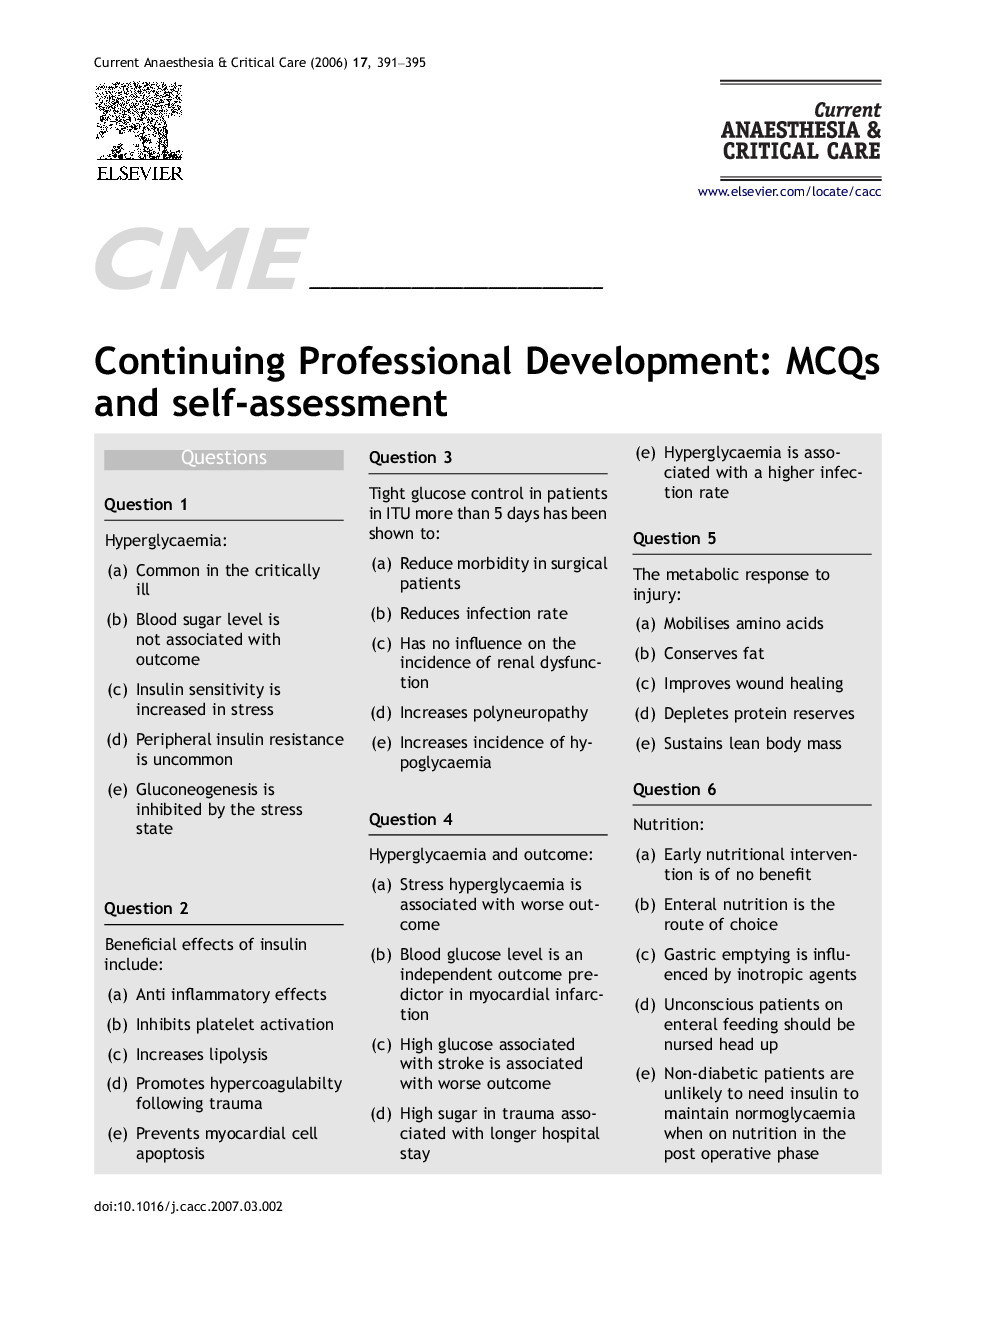 Continuing Professional Development: MCQs and self-assessment